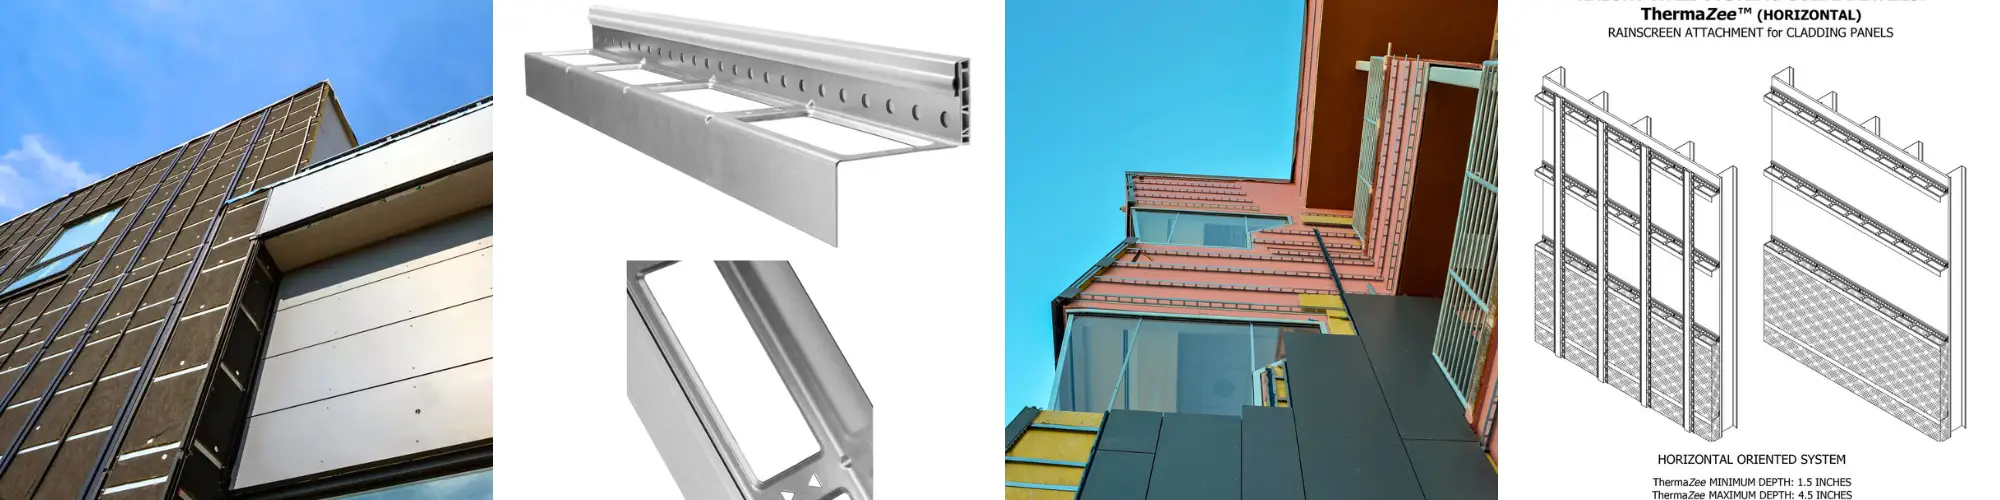 Knight Wall Thermazee Cladding Attachment